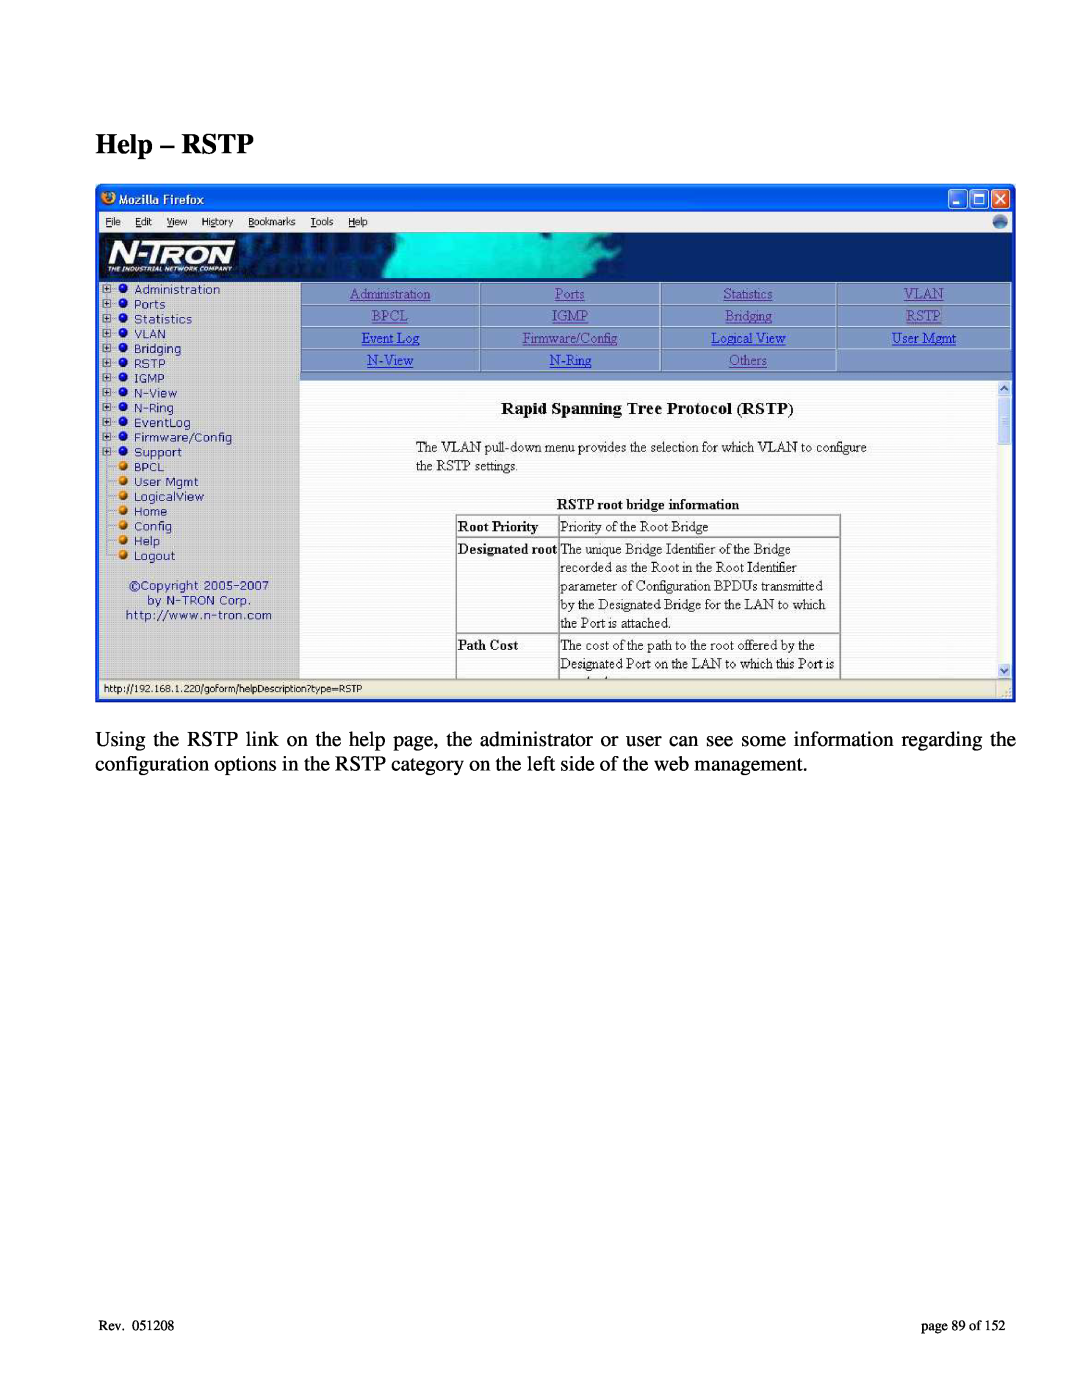 Gigabyte 7014 user manual Help - RSTP, page 89 of 